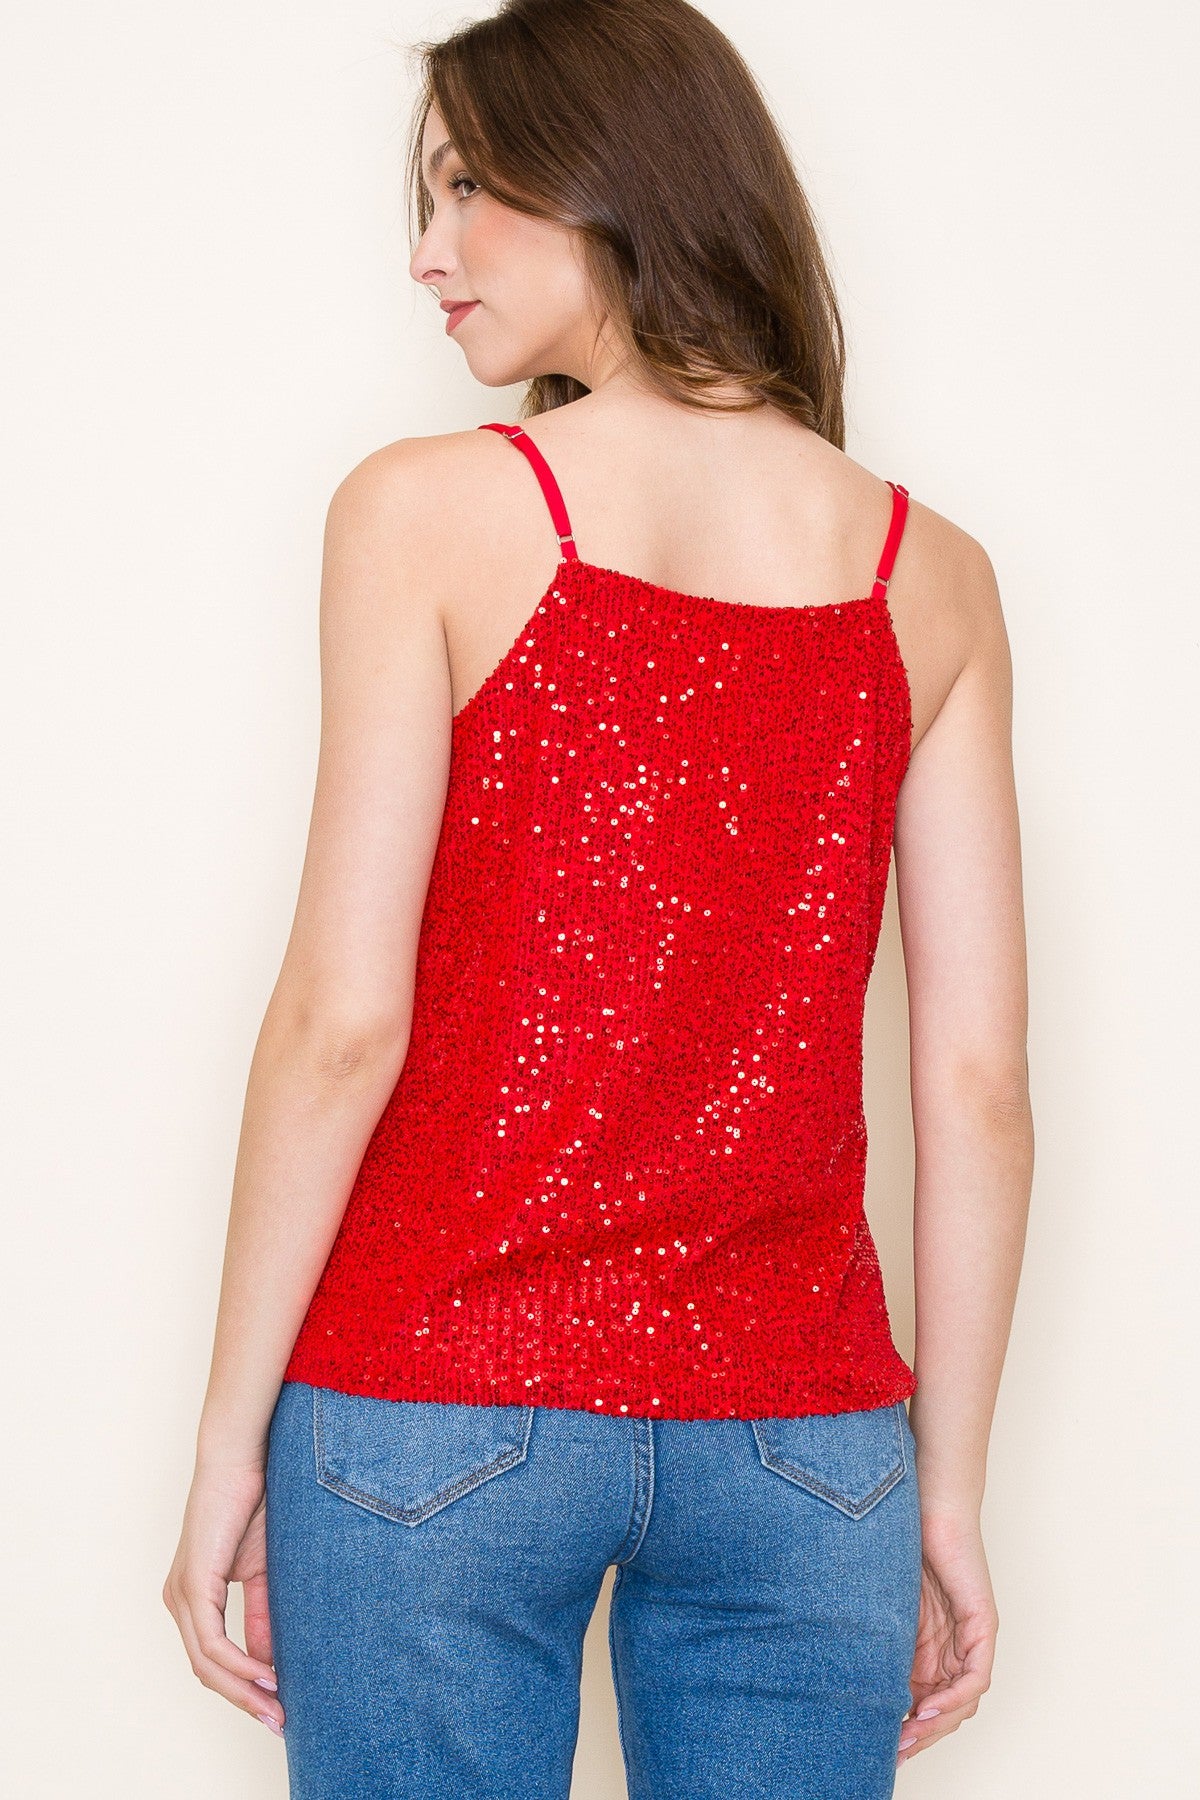 Sparkly red camisole  Red camisole, Tops, Clothes design